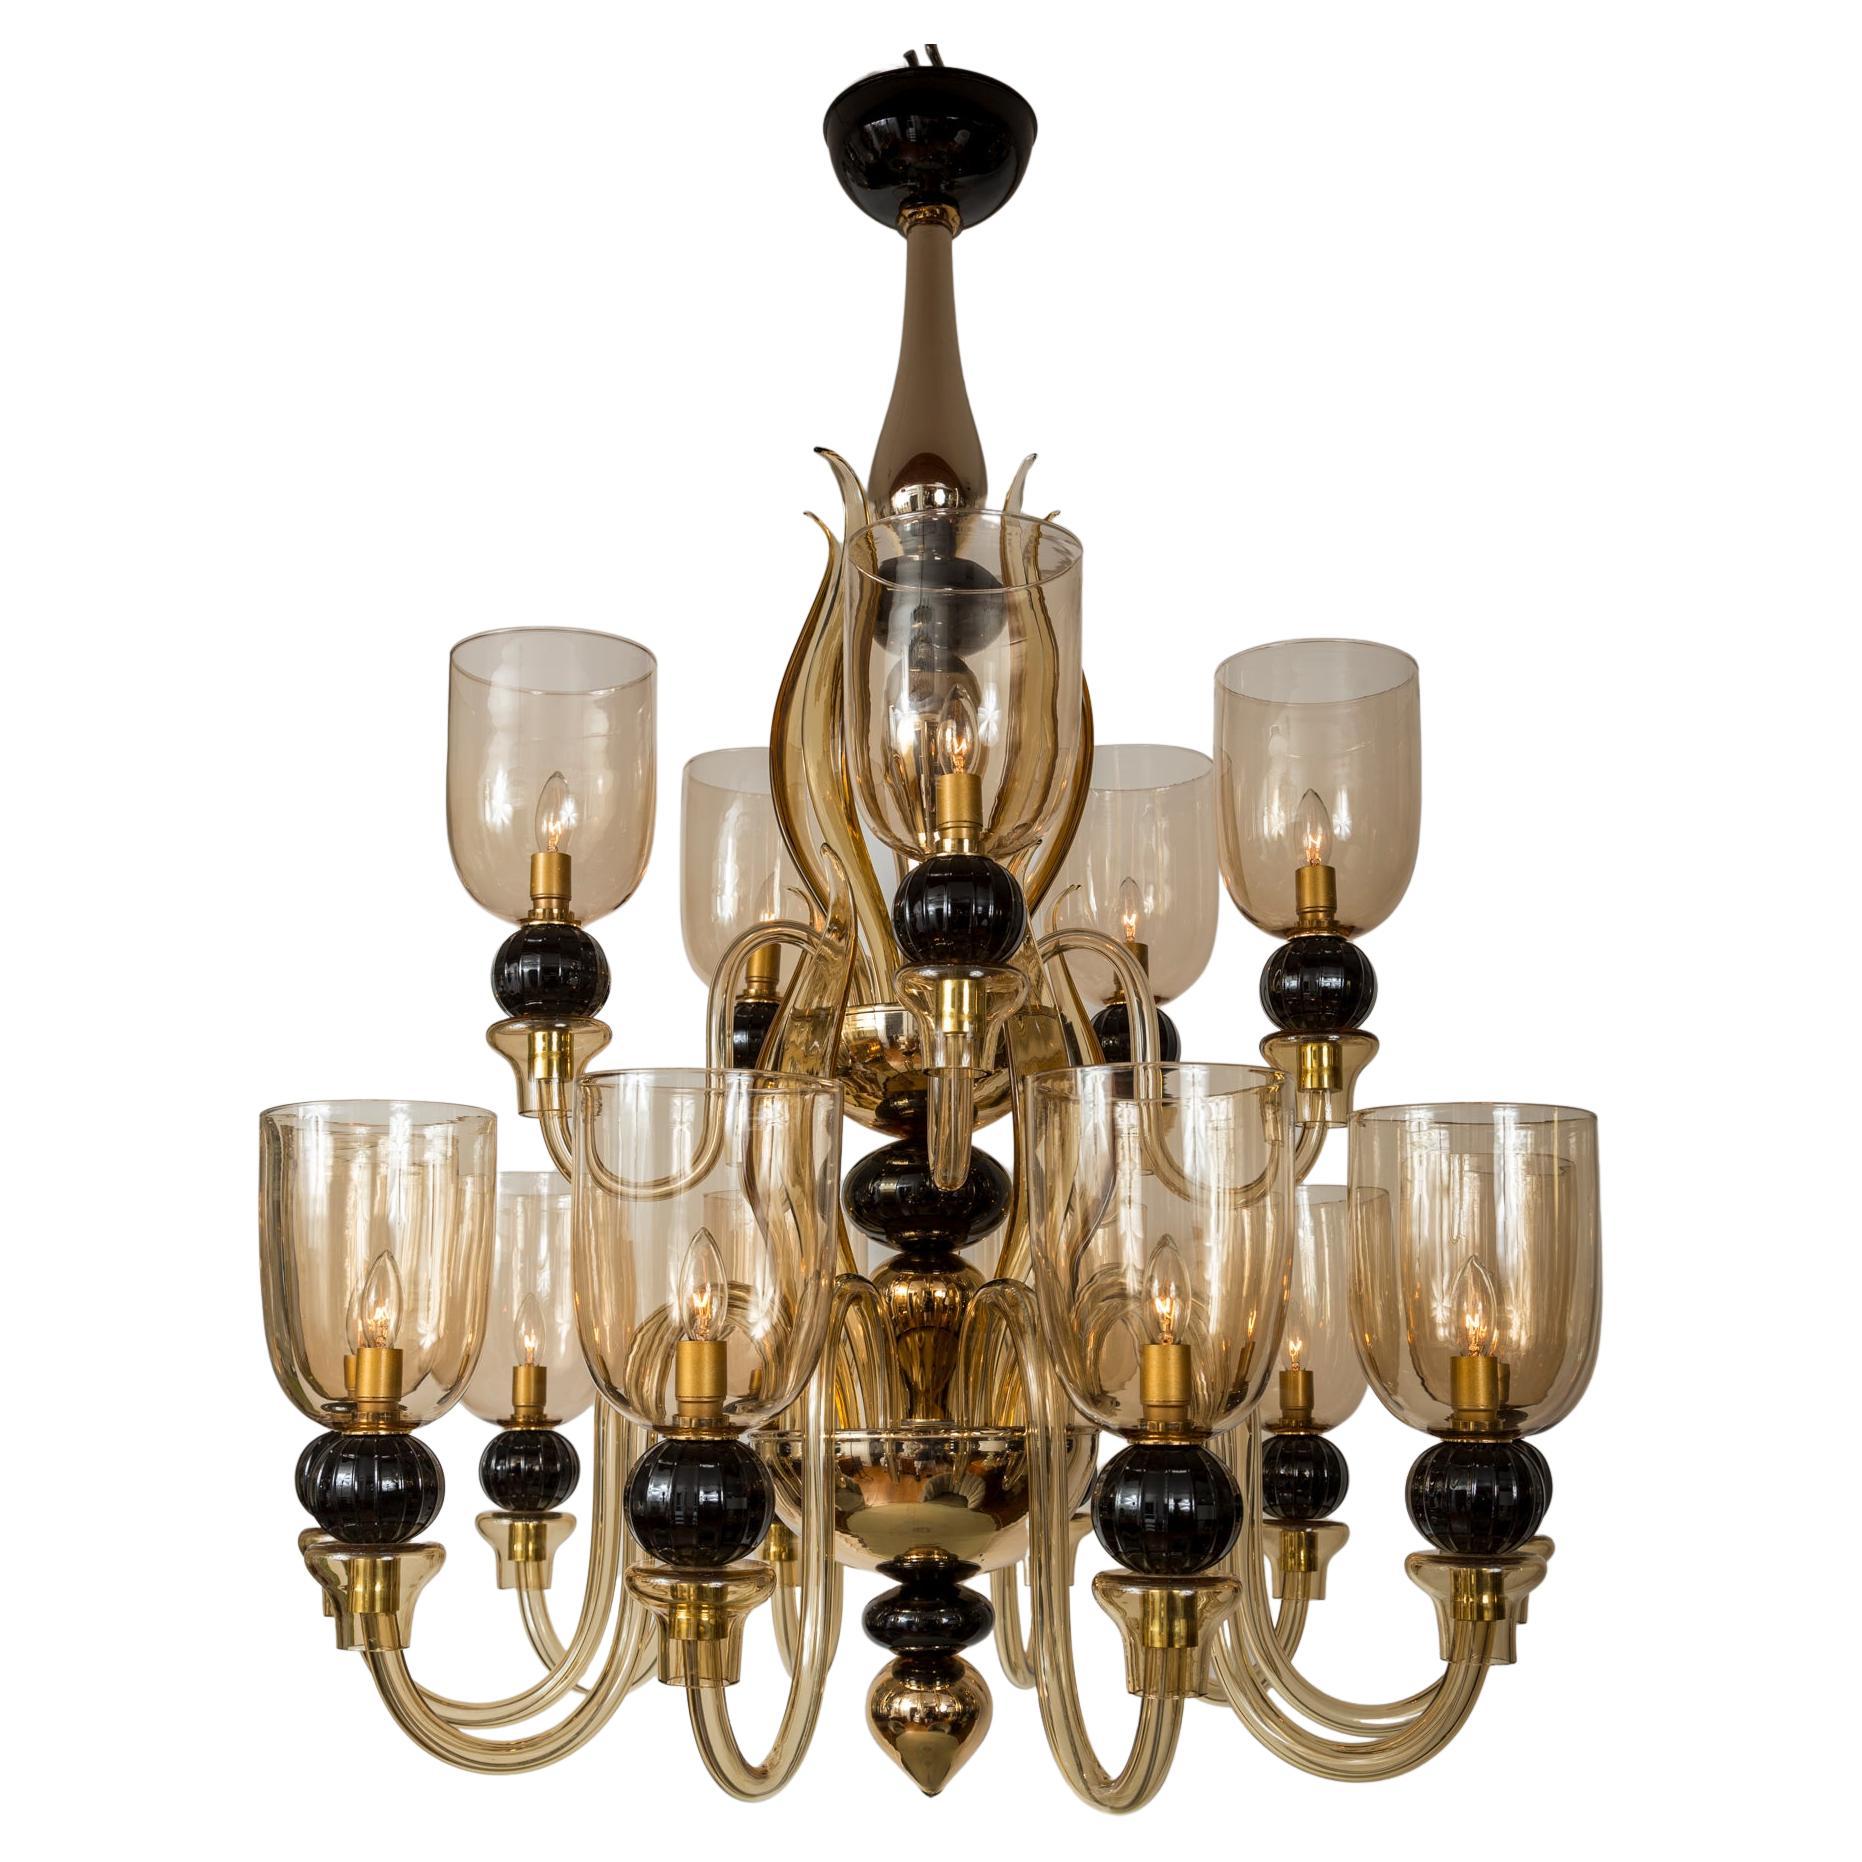 Exemplary masterful work by Maestro Seguso, re-blown from their 1940' s model showcasing a robust and still modern style two-tiered mercury silver, black and amber colored glass chandelier. Its center shaft surrounded by twelve sleek amber leaves